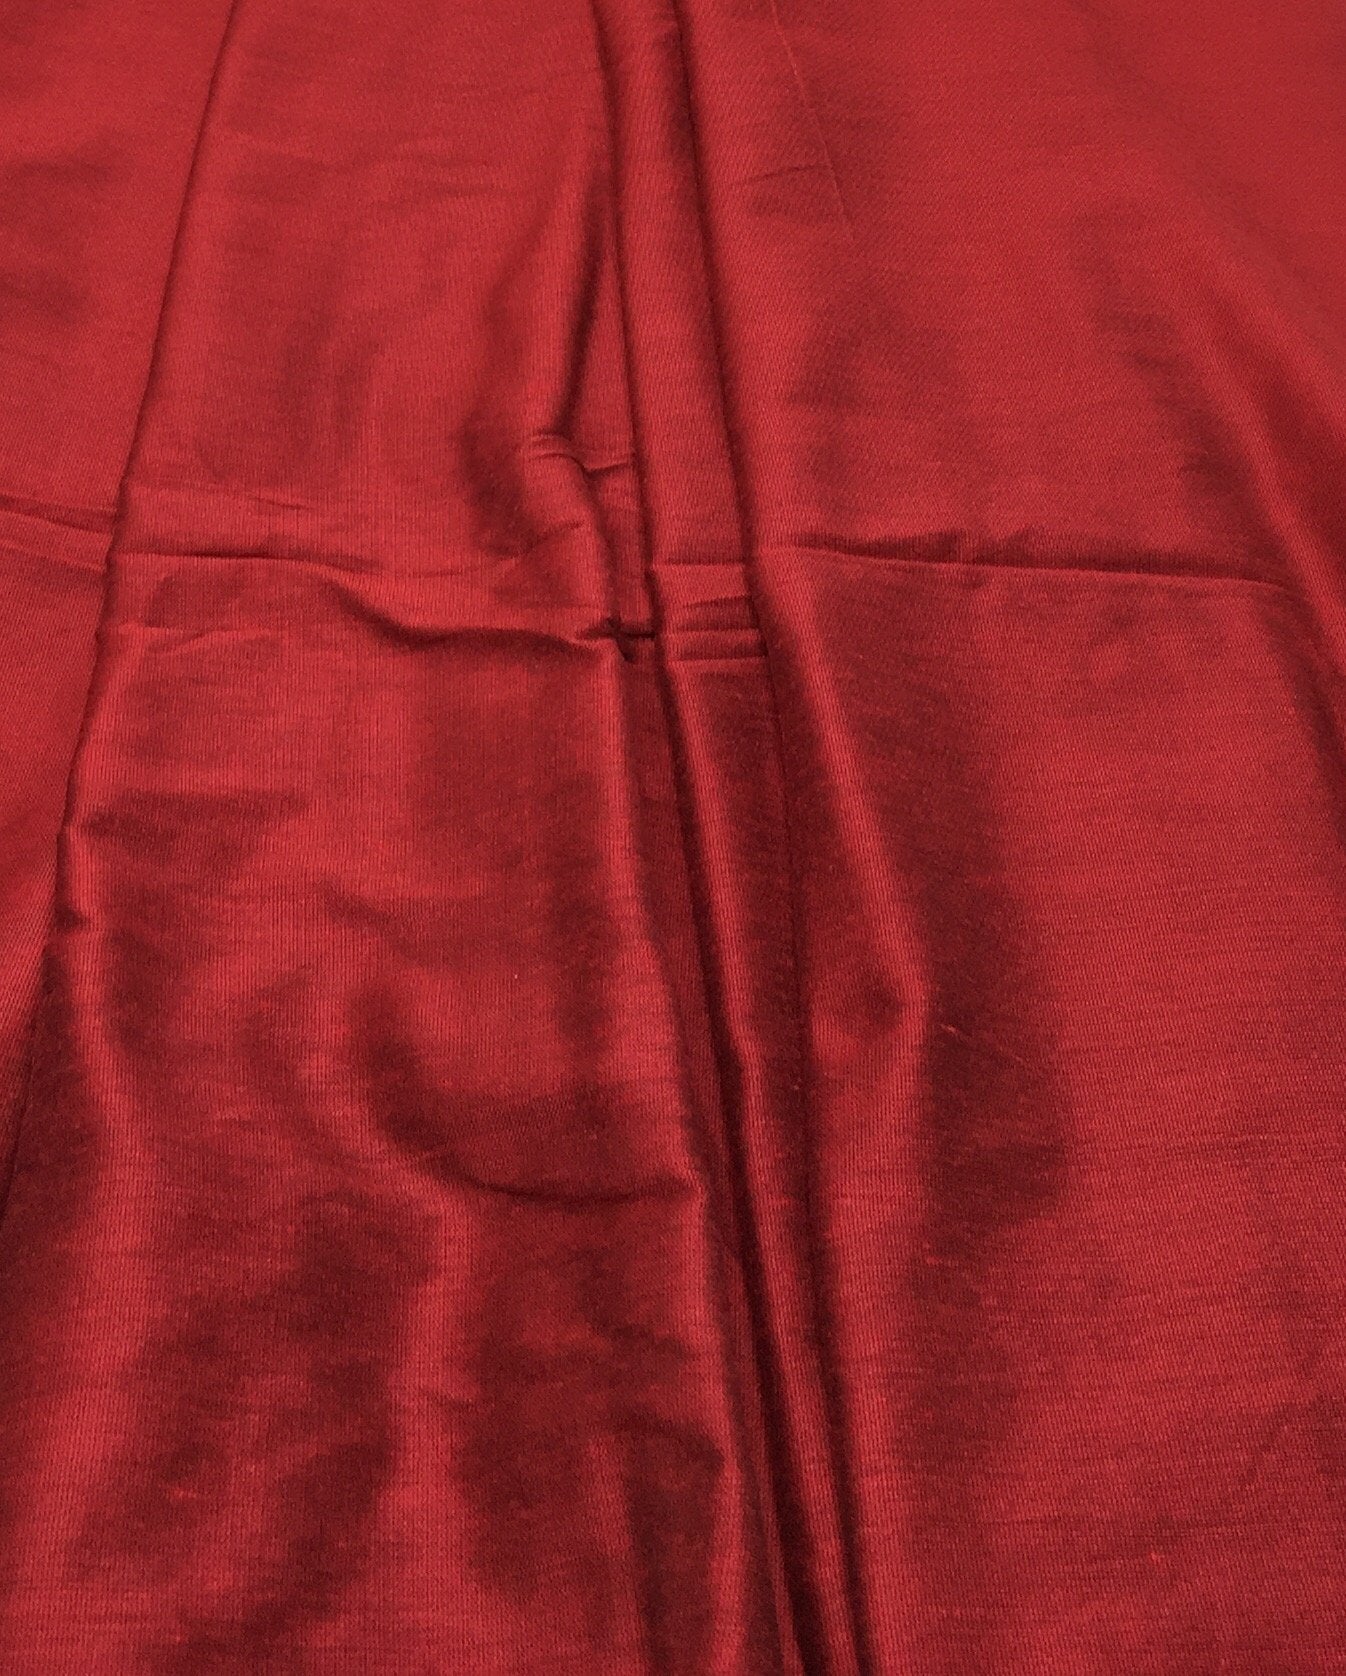 Cotton Silk Maroon Solids  Fabric Material - By the yard